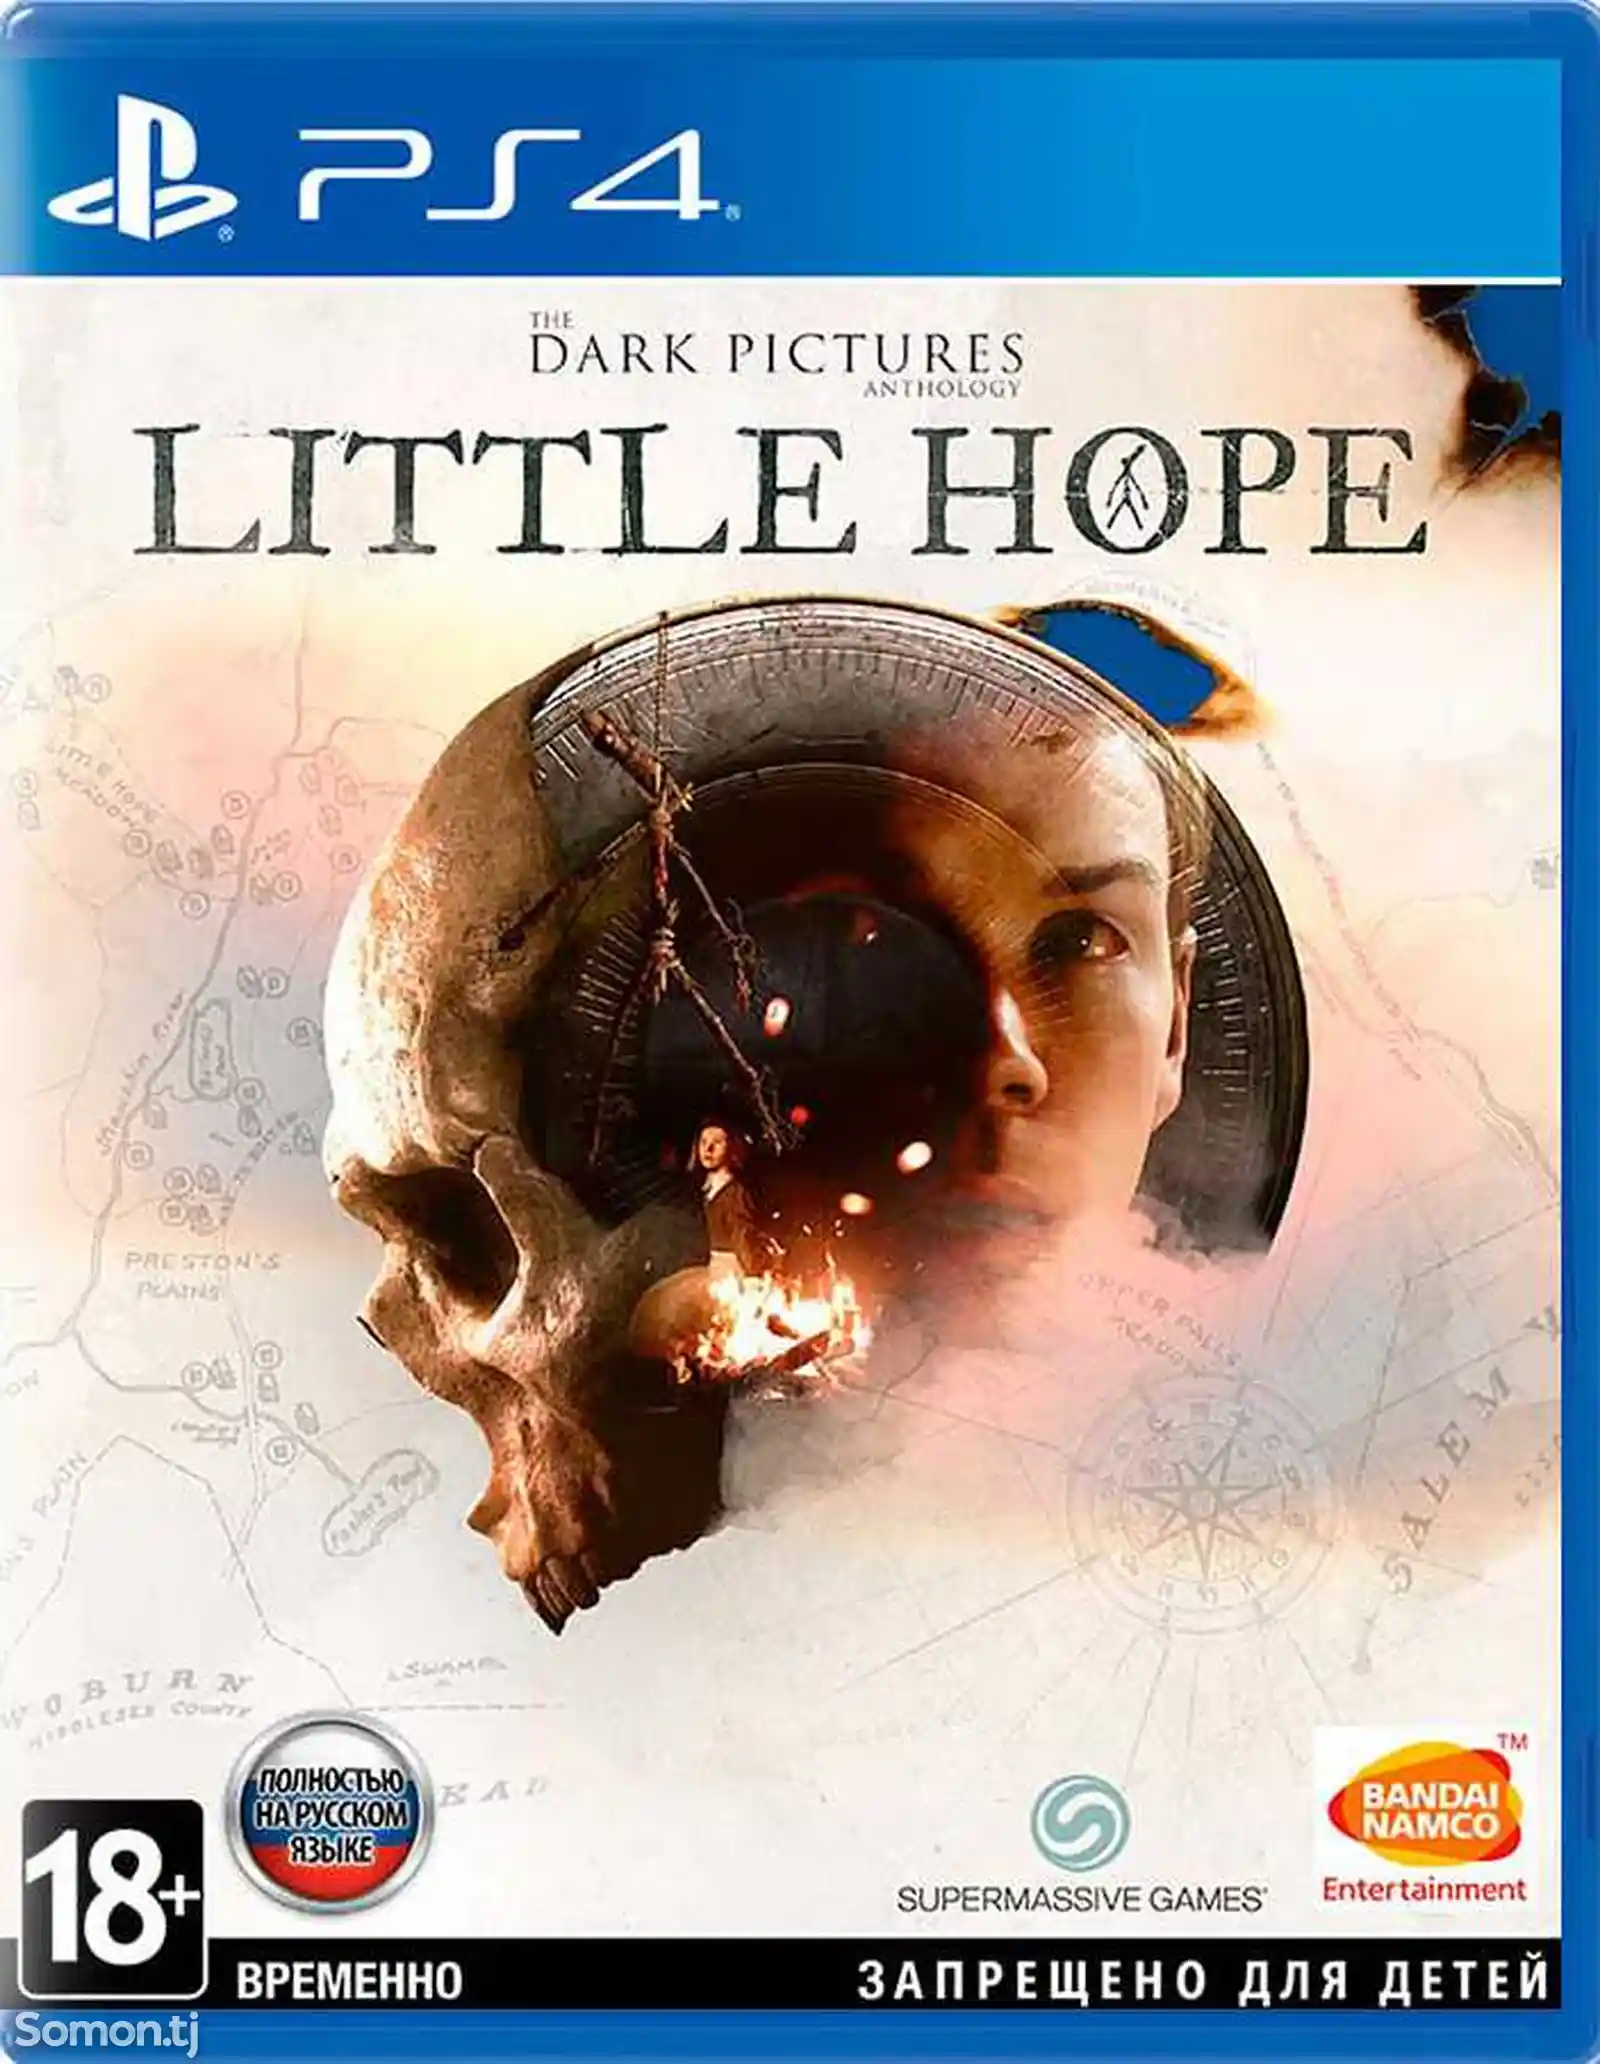 Игра The dark pictures anthology little hope для PS-4 / 5.05 / 6.72 / 9.00 /